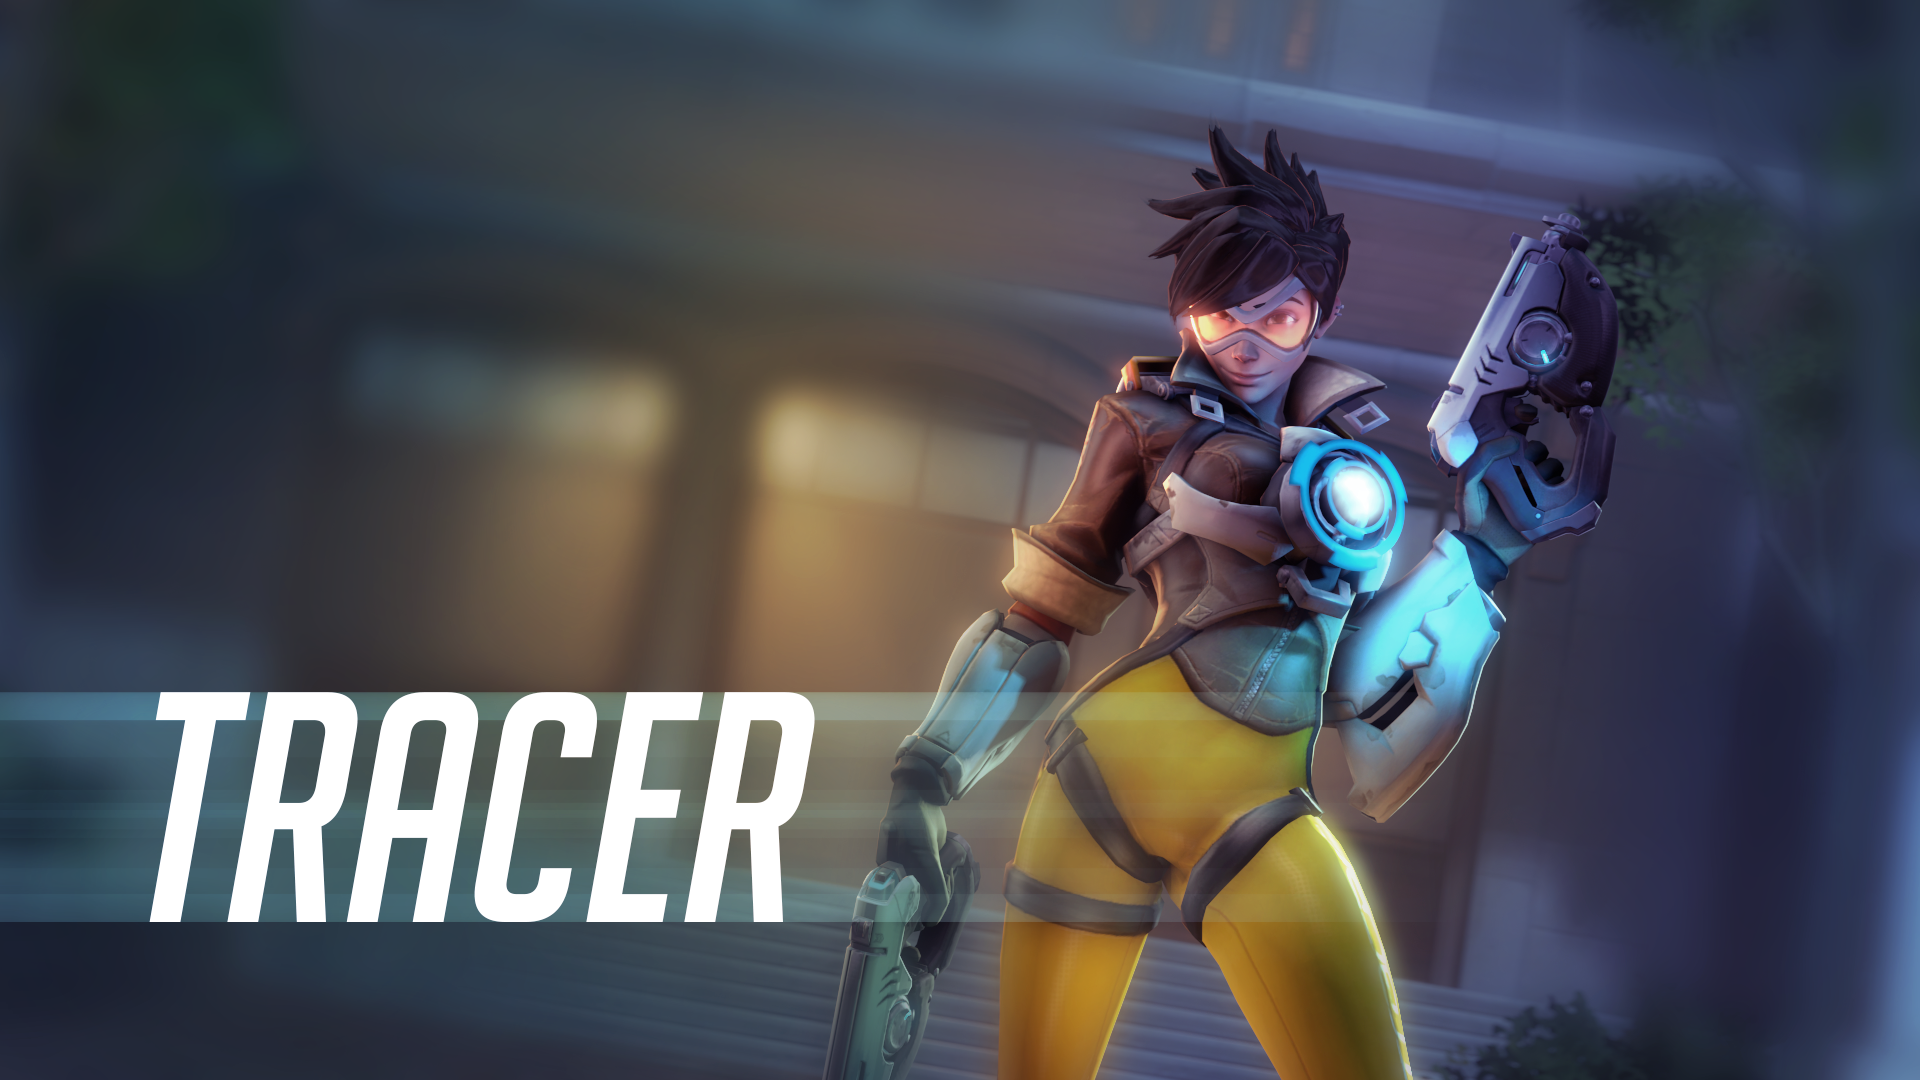 tracer overwatch wallpaper,pc game,cg artwork,fictional character,anime,action figure